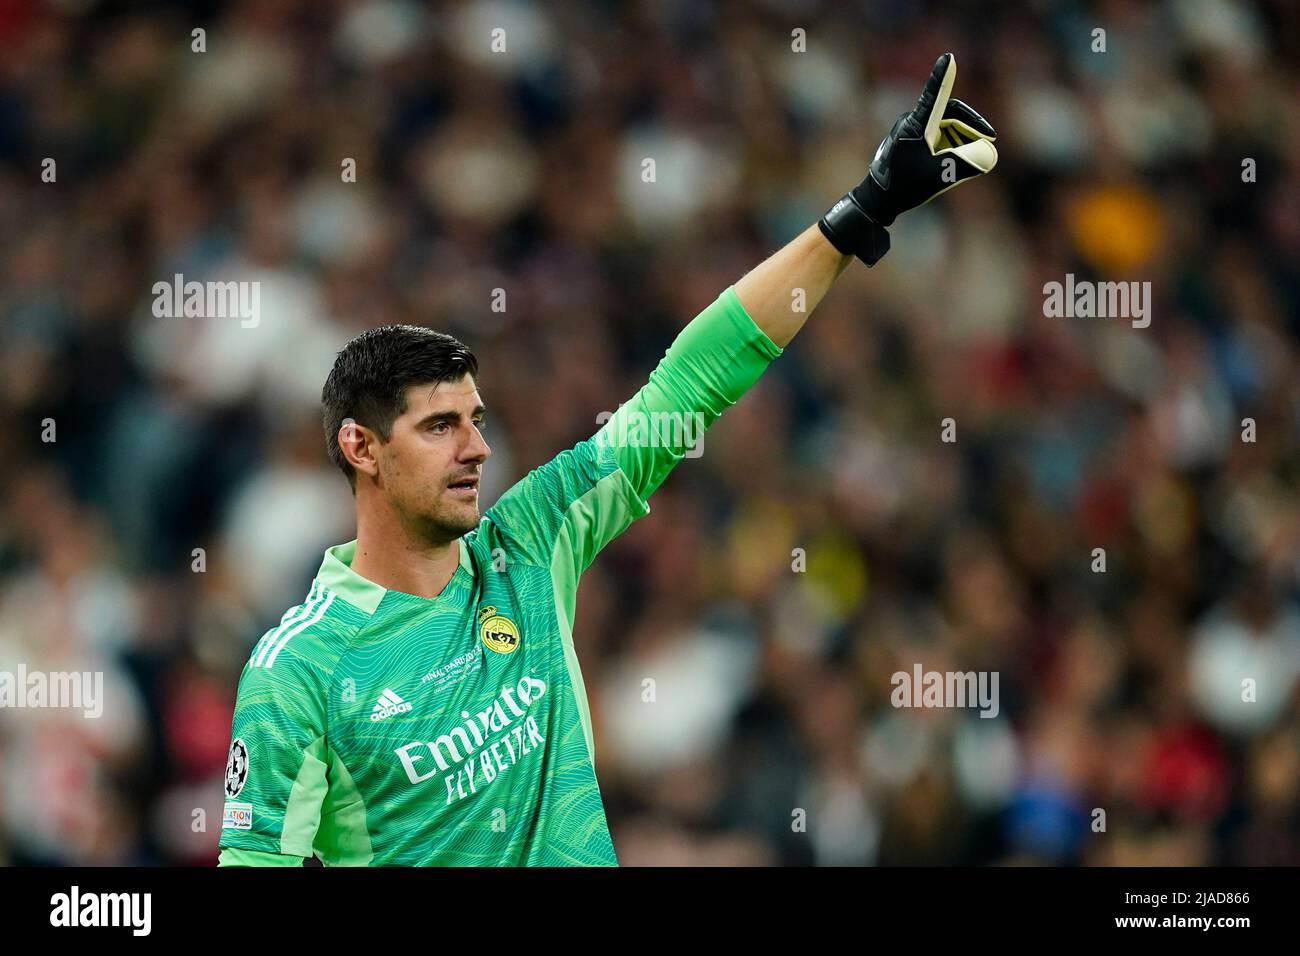 Thibaut Courtois of Real Madrid during the UEFA Champions League Final match between Liverpool FC and Real Madrid played at Stade de France on May 28, 2022 in Paris, France. (Photo / Magma) Stock Photo